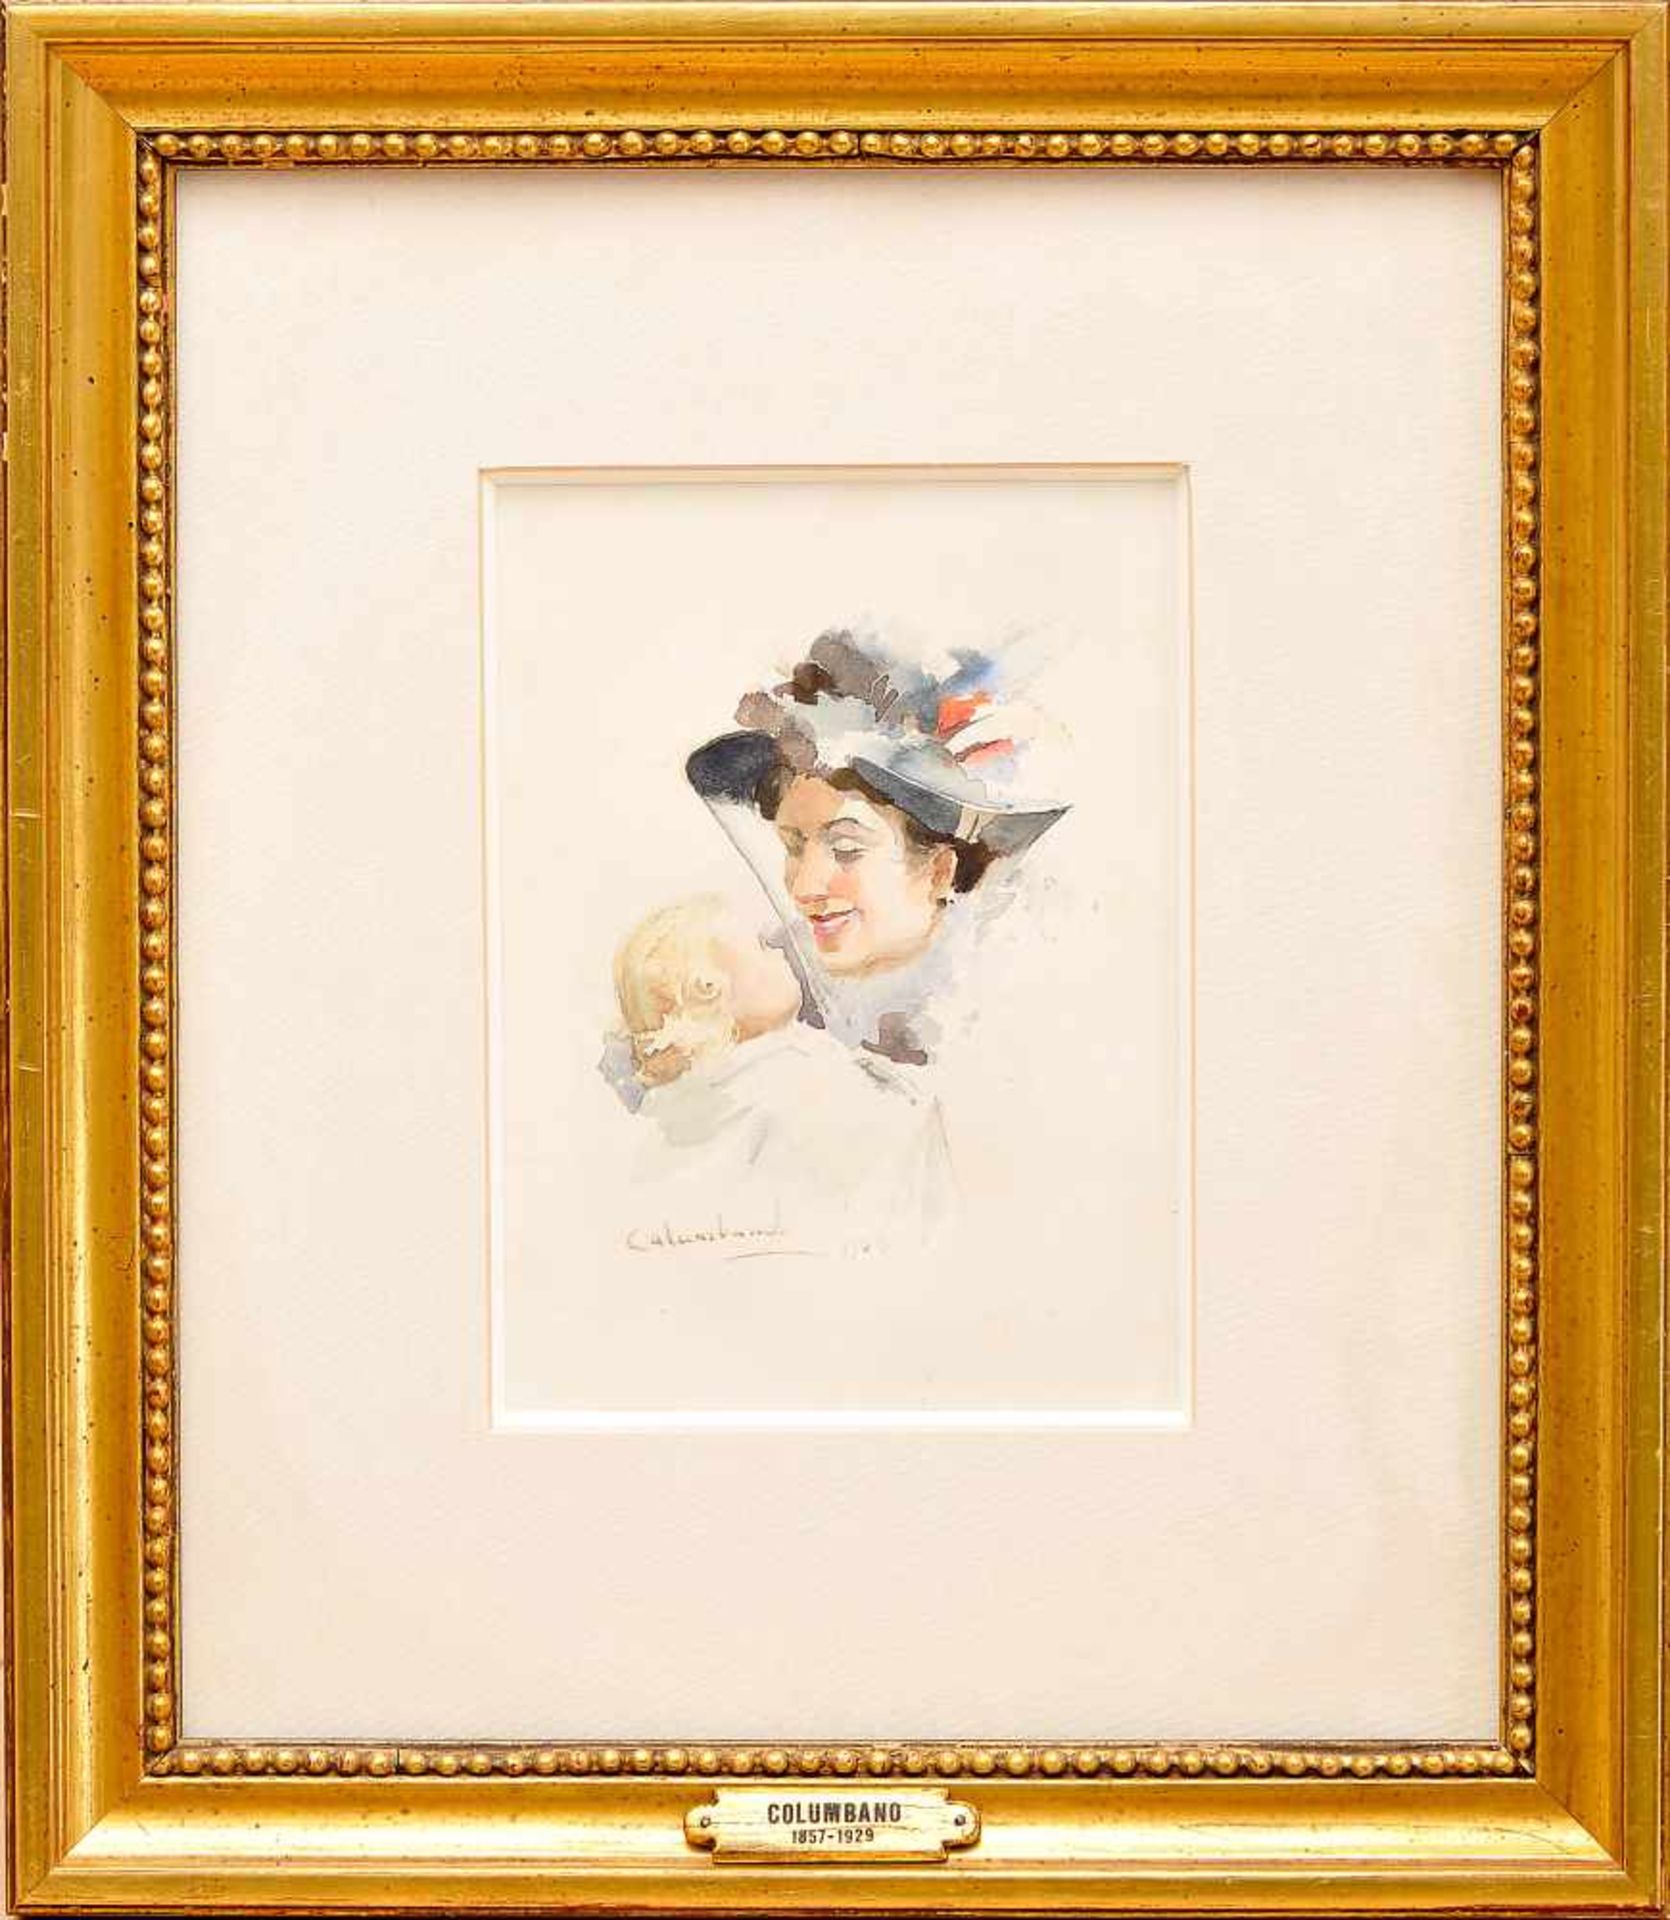 COLUMBANO BORDALO PINHEIRO - 1857-1929, A Lady holding a Baby, watercolour on paper, signed and